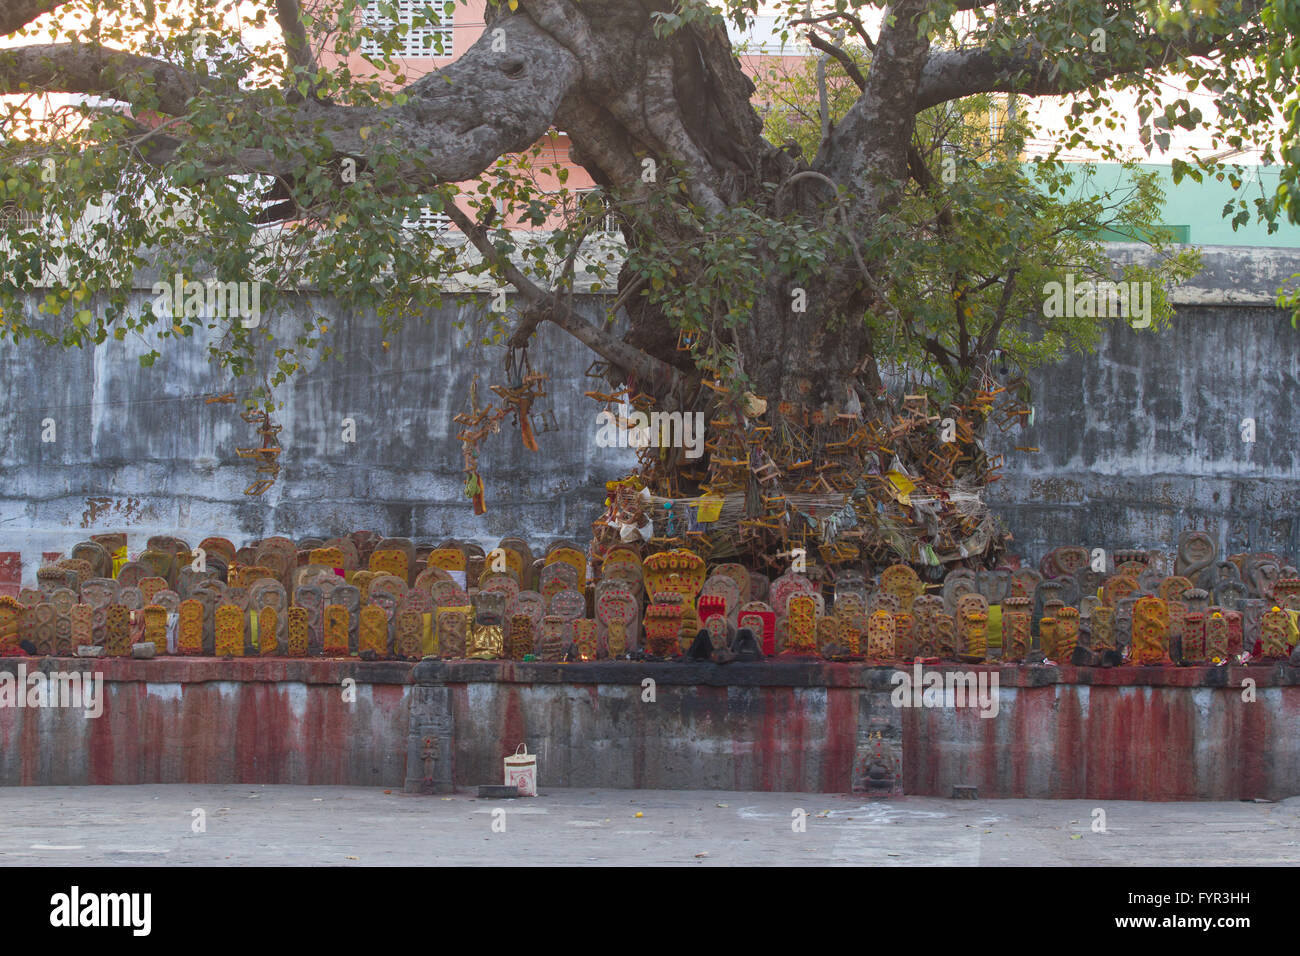 Group of yellow tombs with red dots in Shiva temple, Kanchipuram, Tamil Nadu Stock Photo